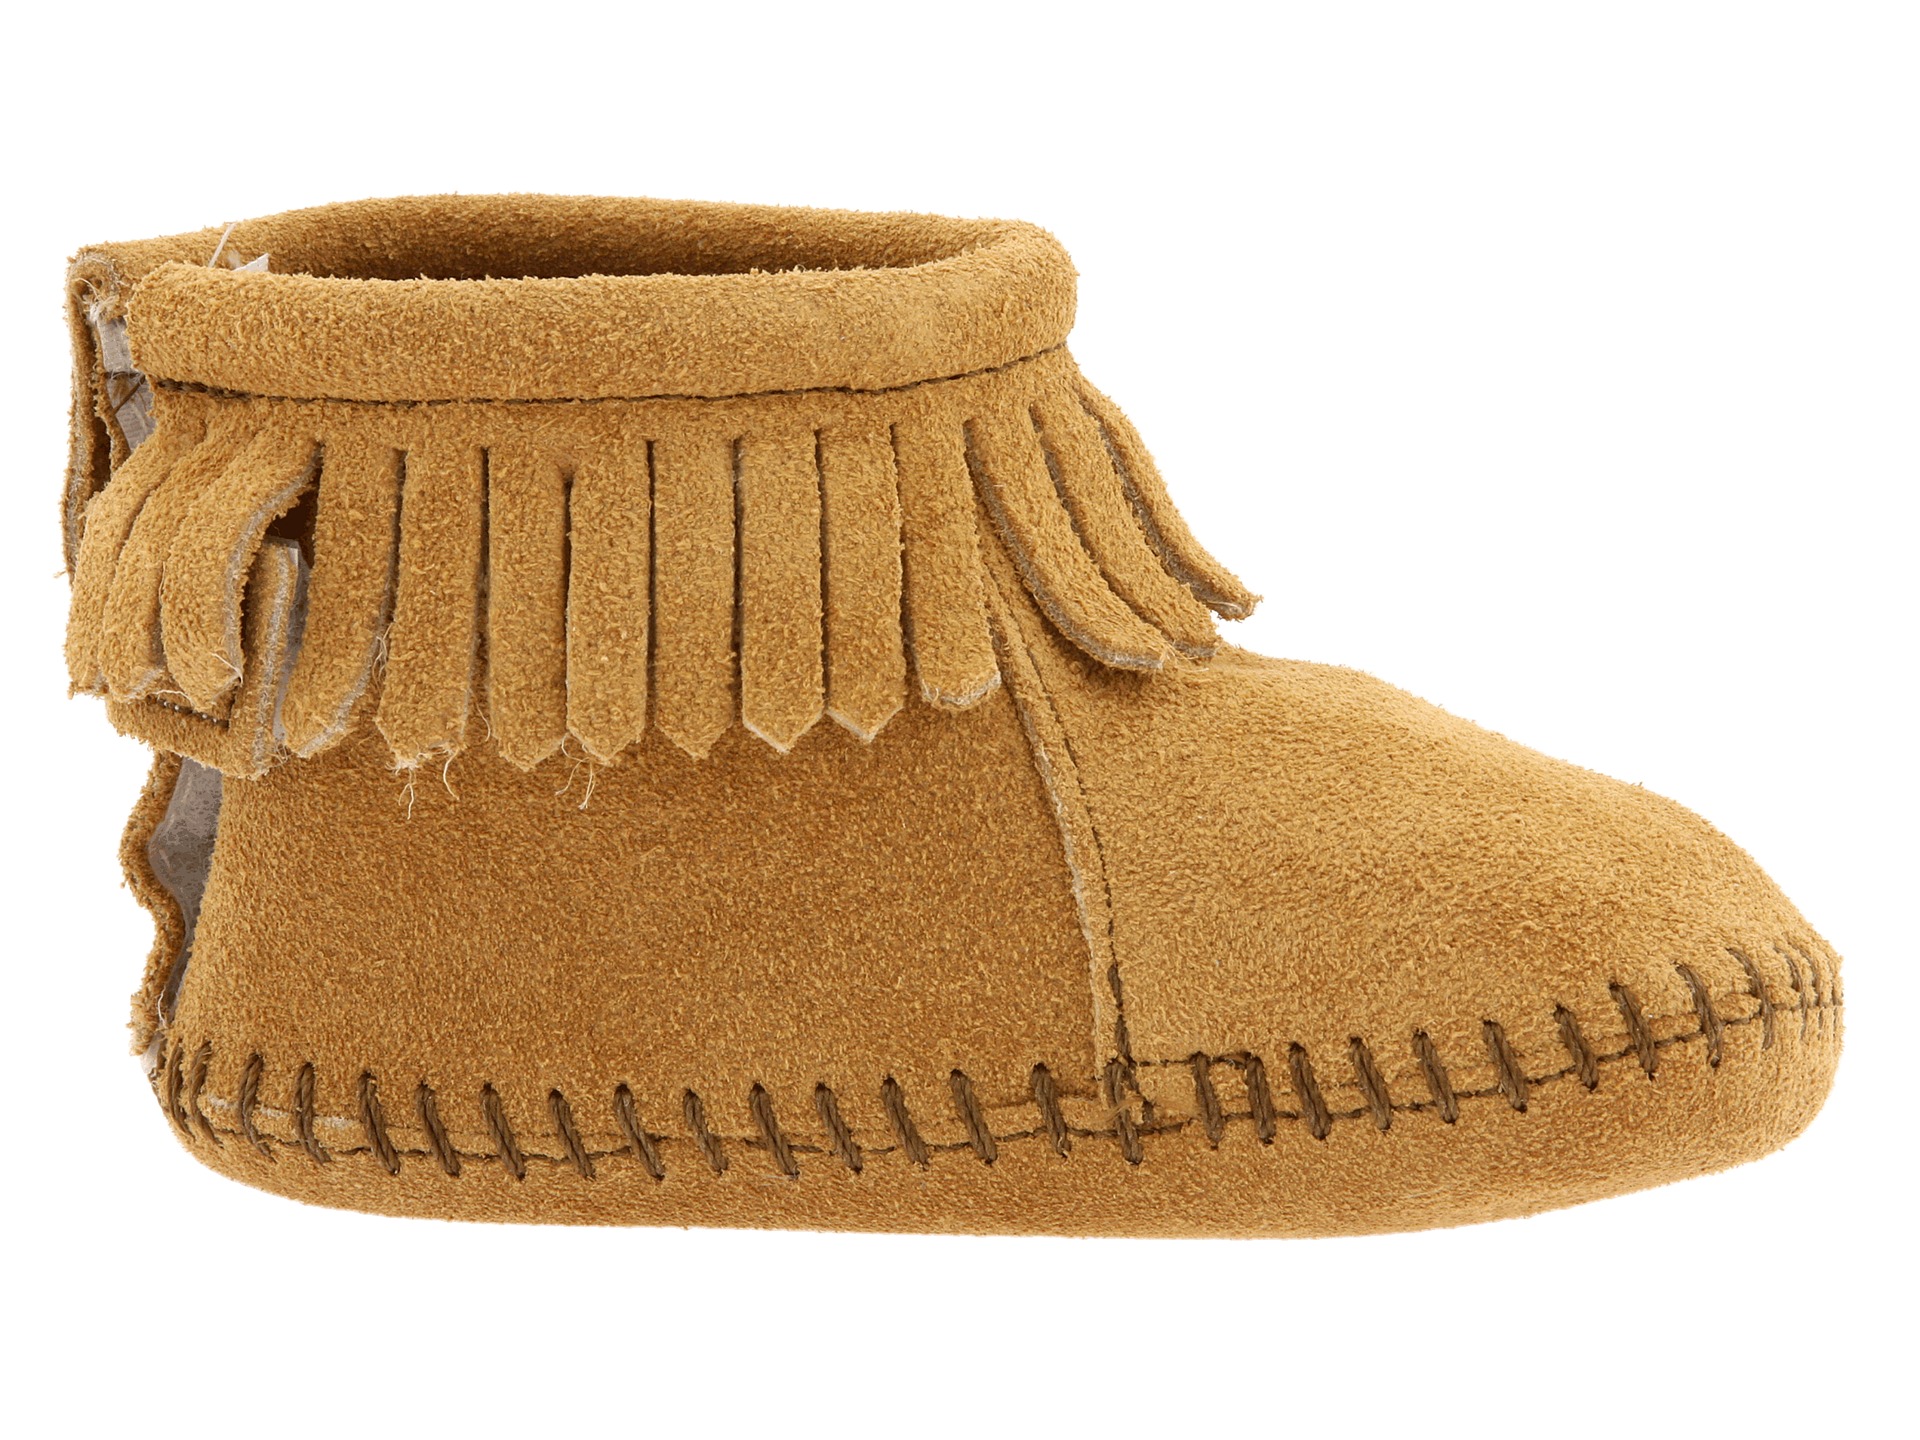 Minnetonka Kids Suede Back Flap Bootie (Infant/Toddler) at Zappos.com